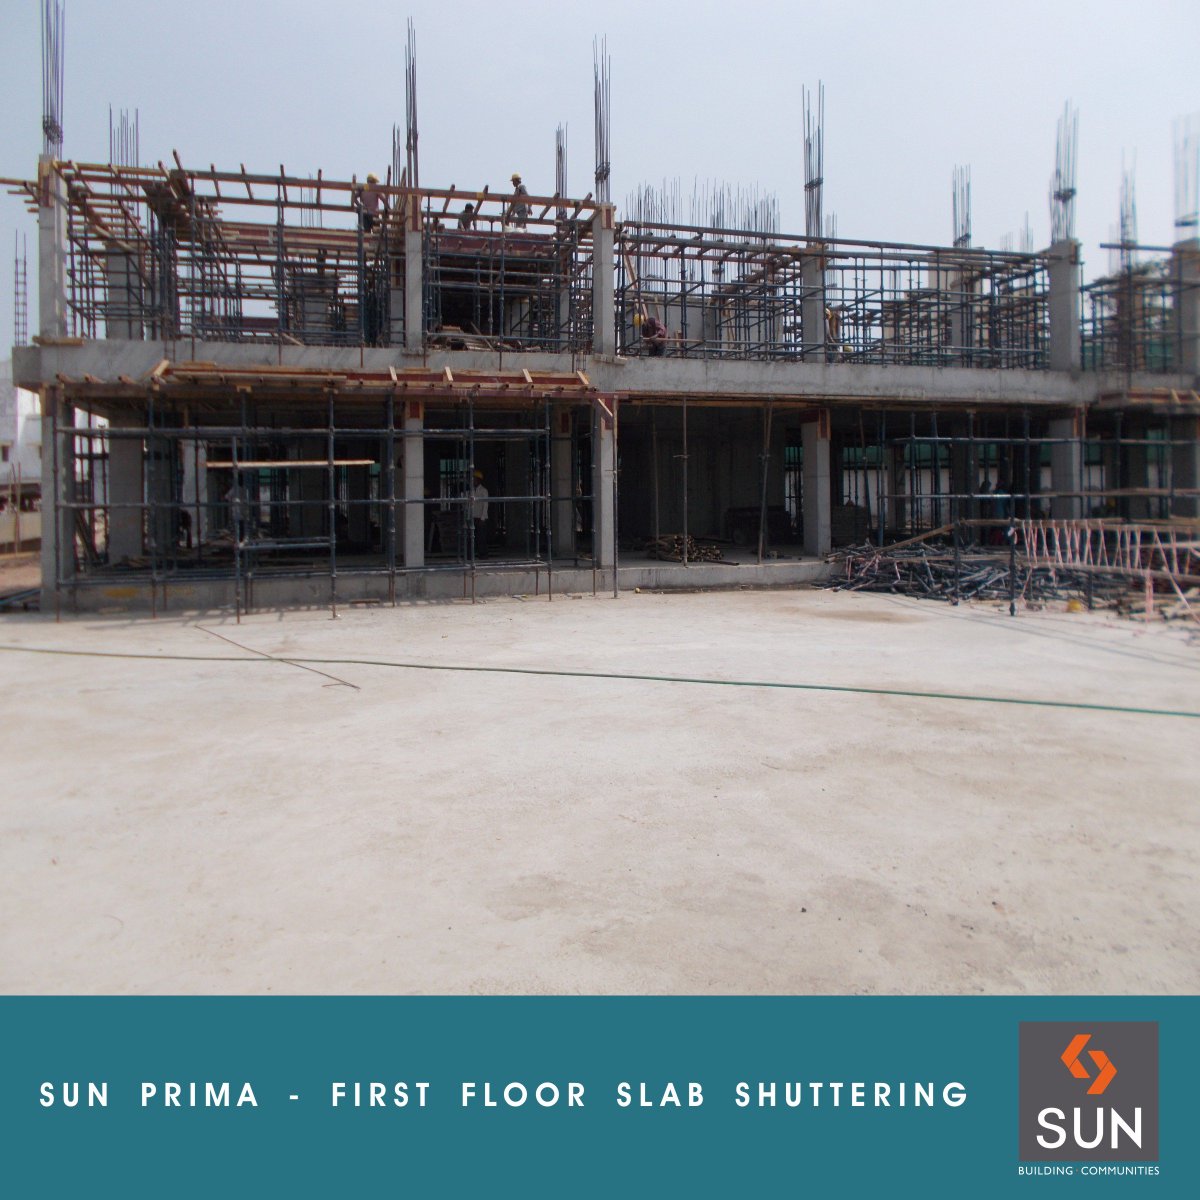 Have a glance at the significant progress of Sun Prima at Manekbaug.

Visit: https://t.co/KMGjkWq08w https://t.co/W95FWO3eGi